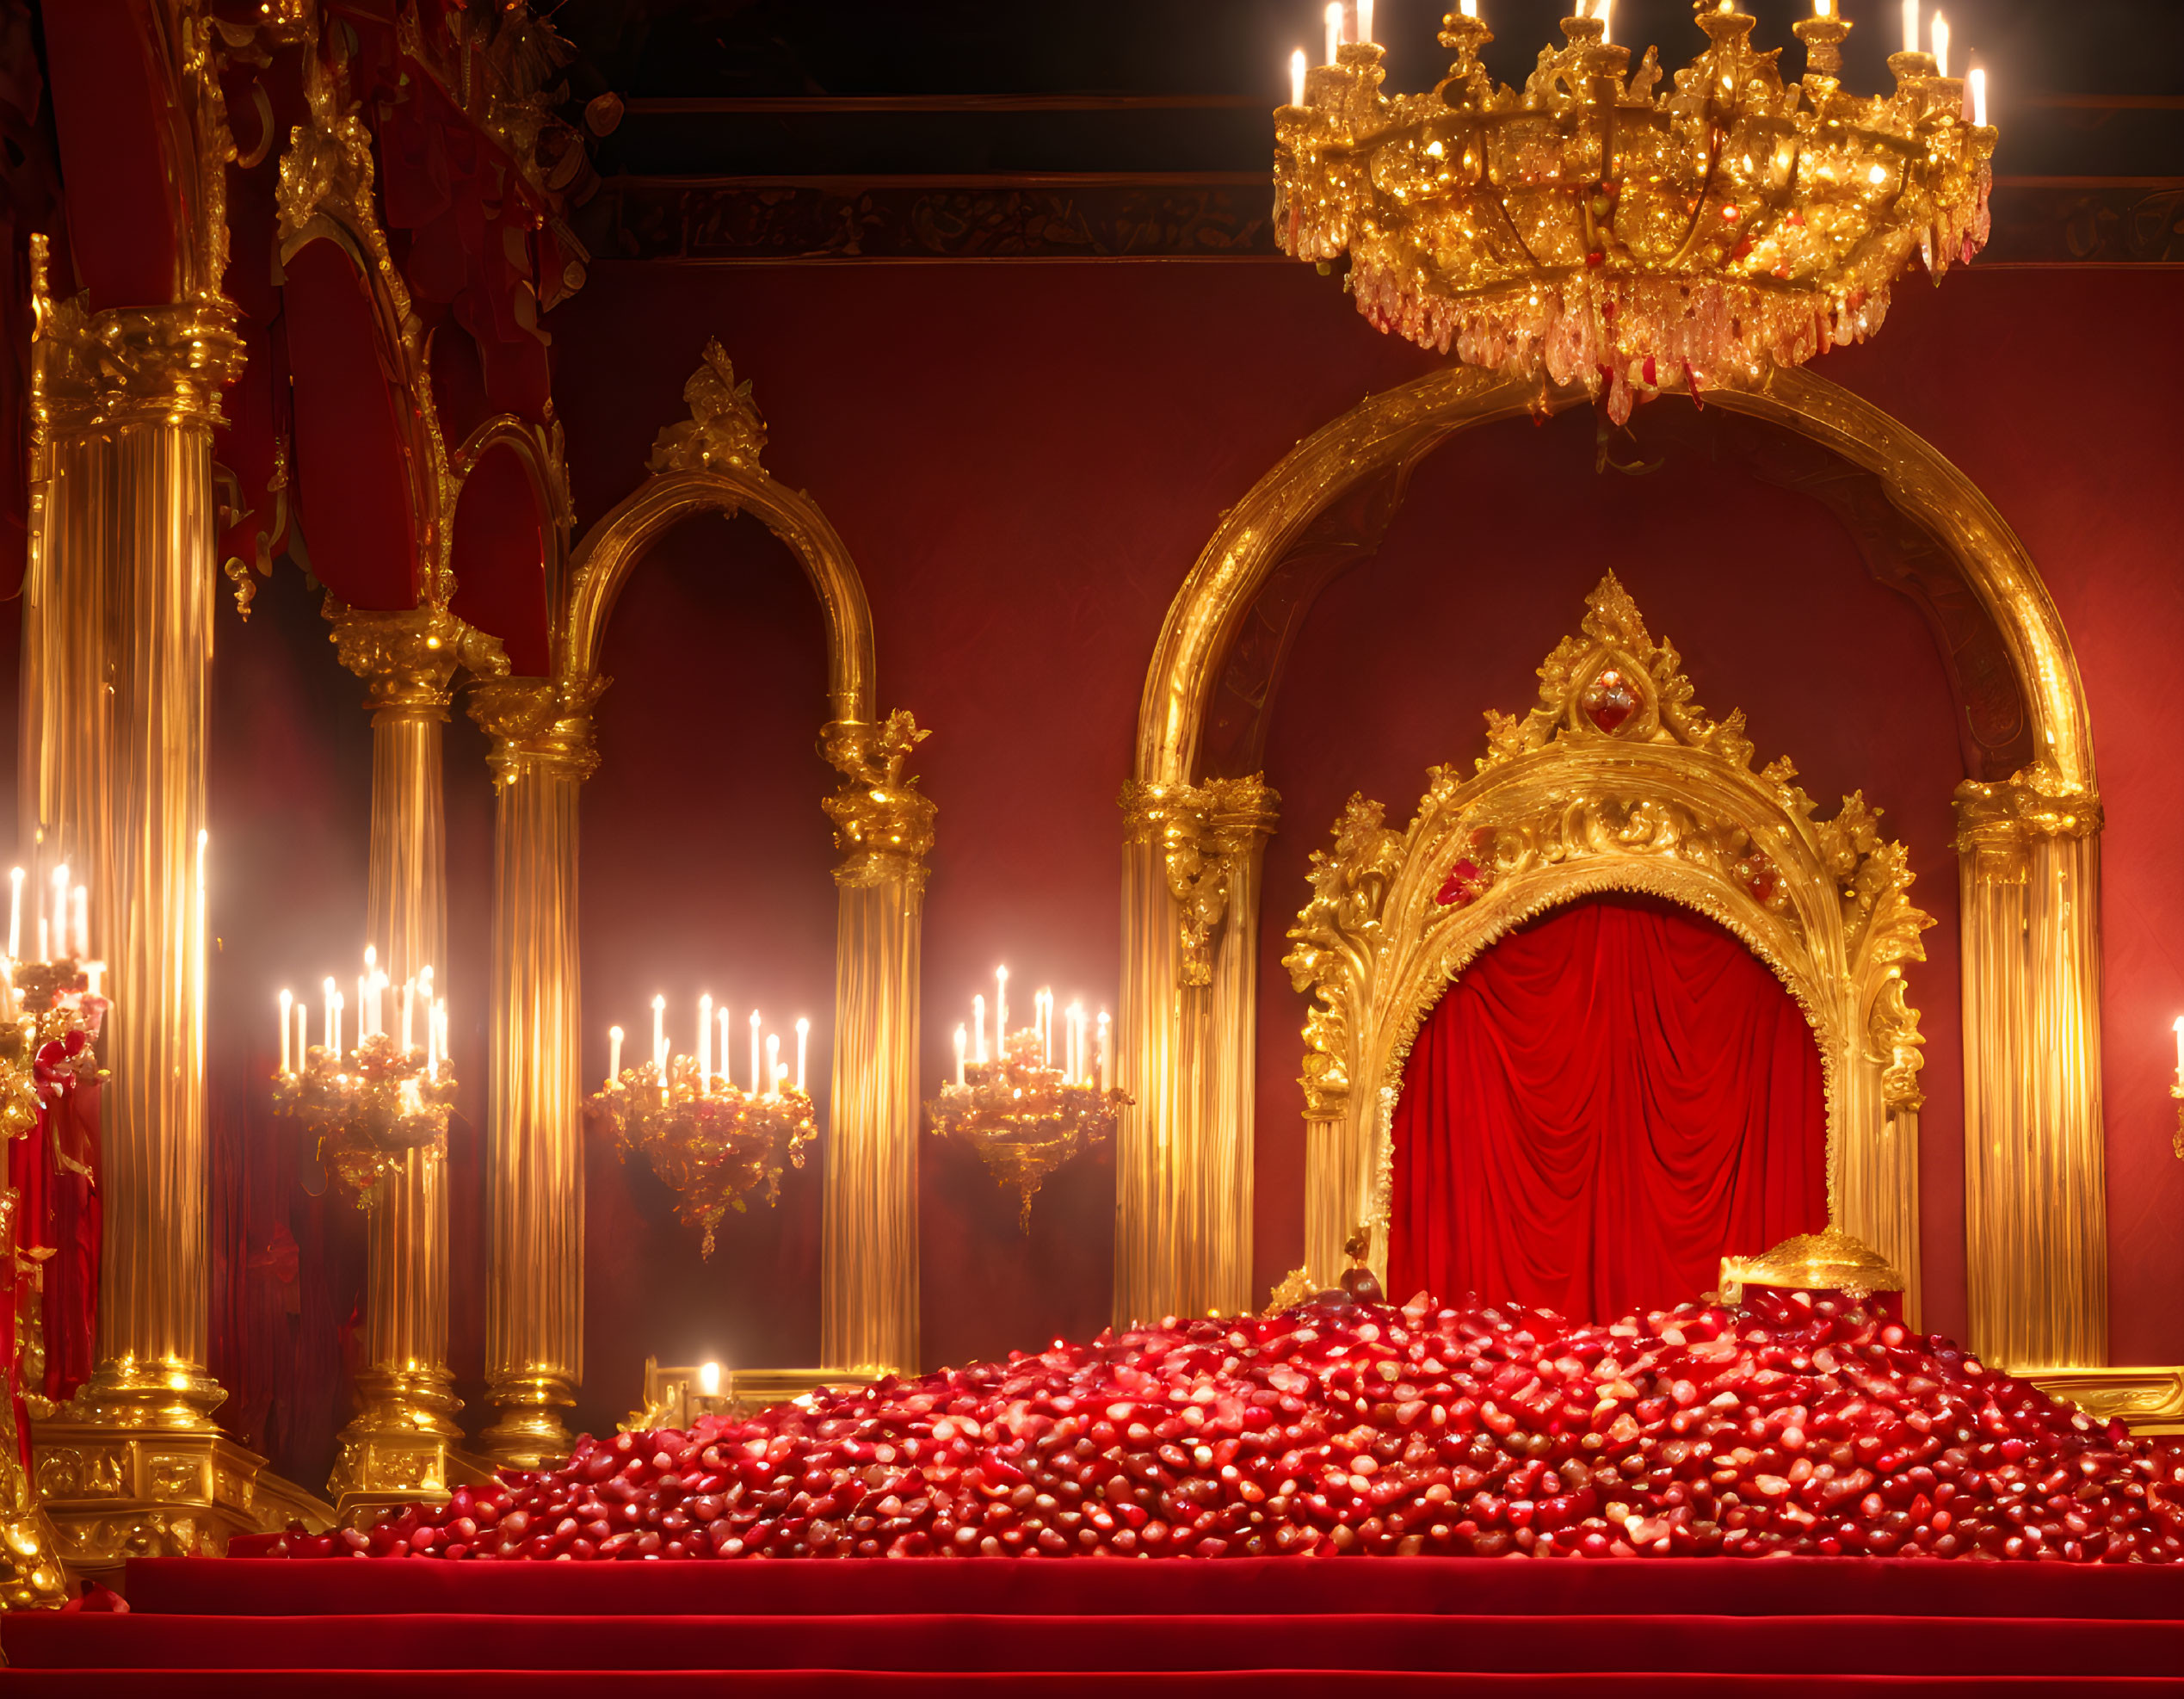 Luxurious Red-themed Room with Grand Chandelier and Golden Arches